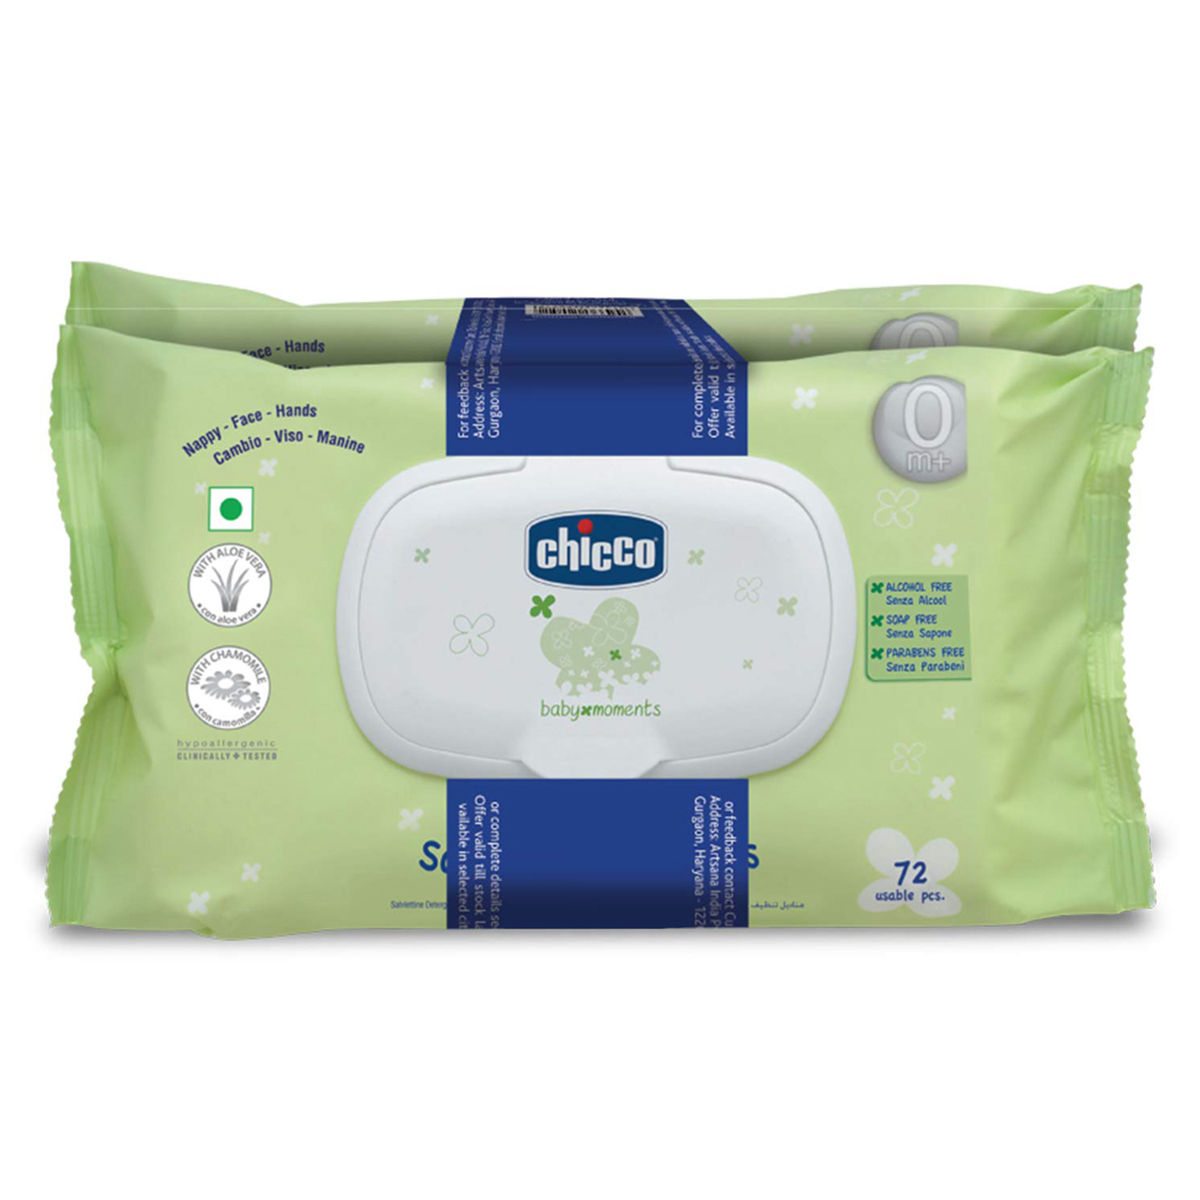 Buy Chicco Baby Moments Soft Cleansing Baby Wipes, 144 Count (2 x 72 Wipes) Online